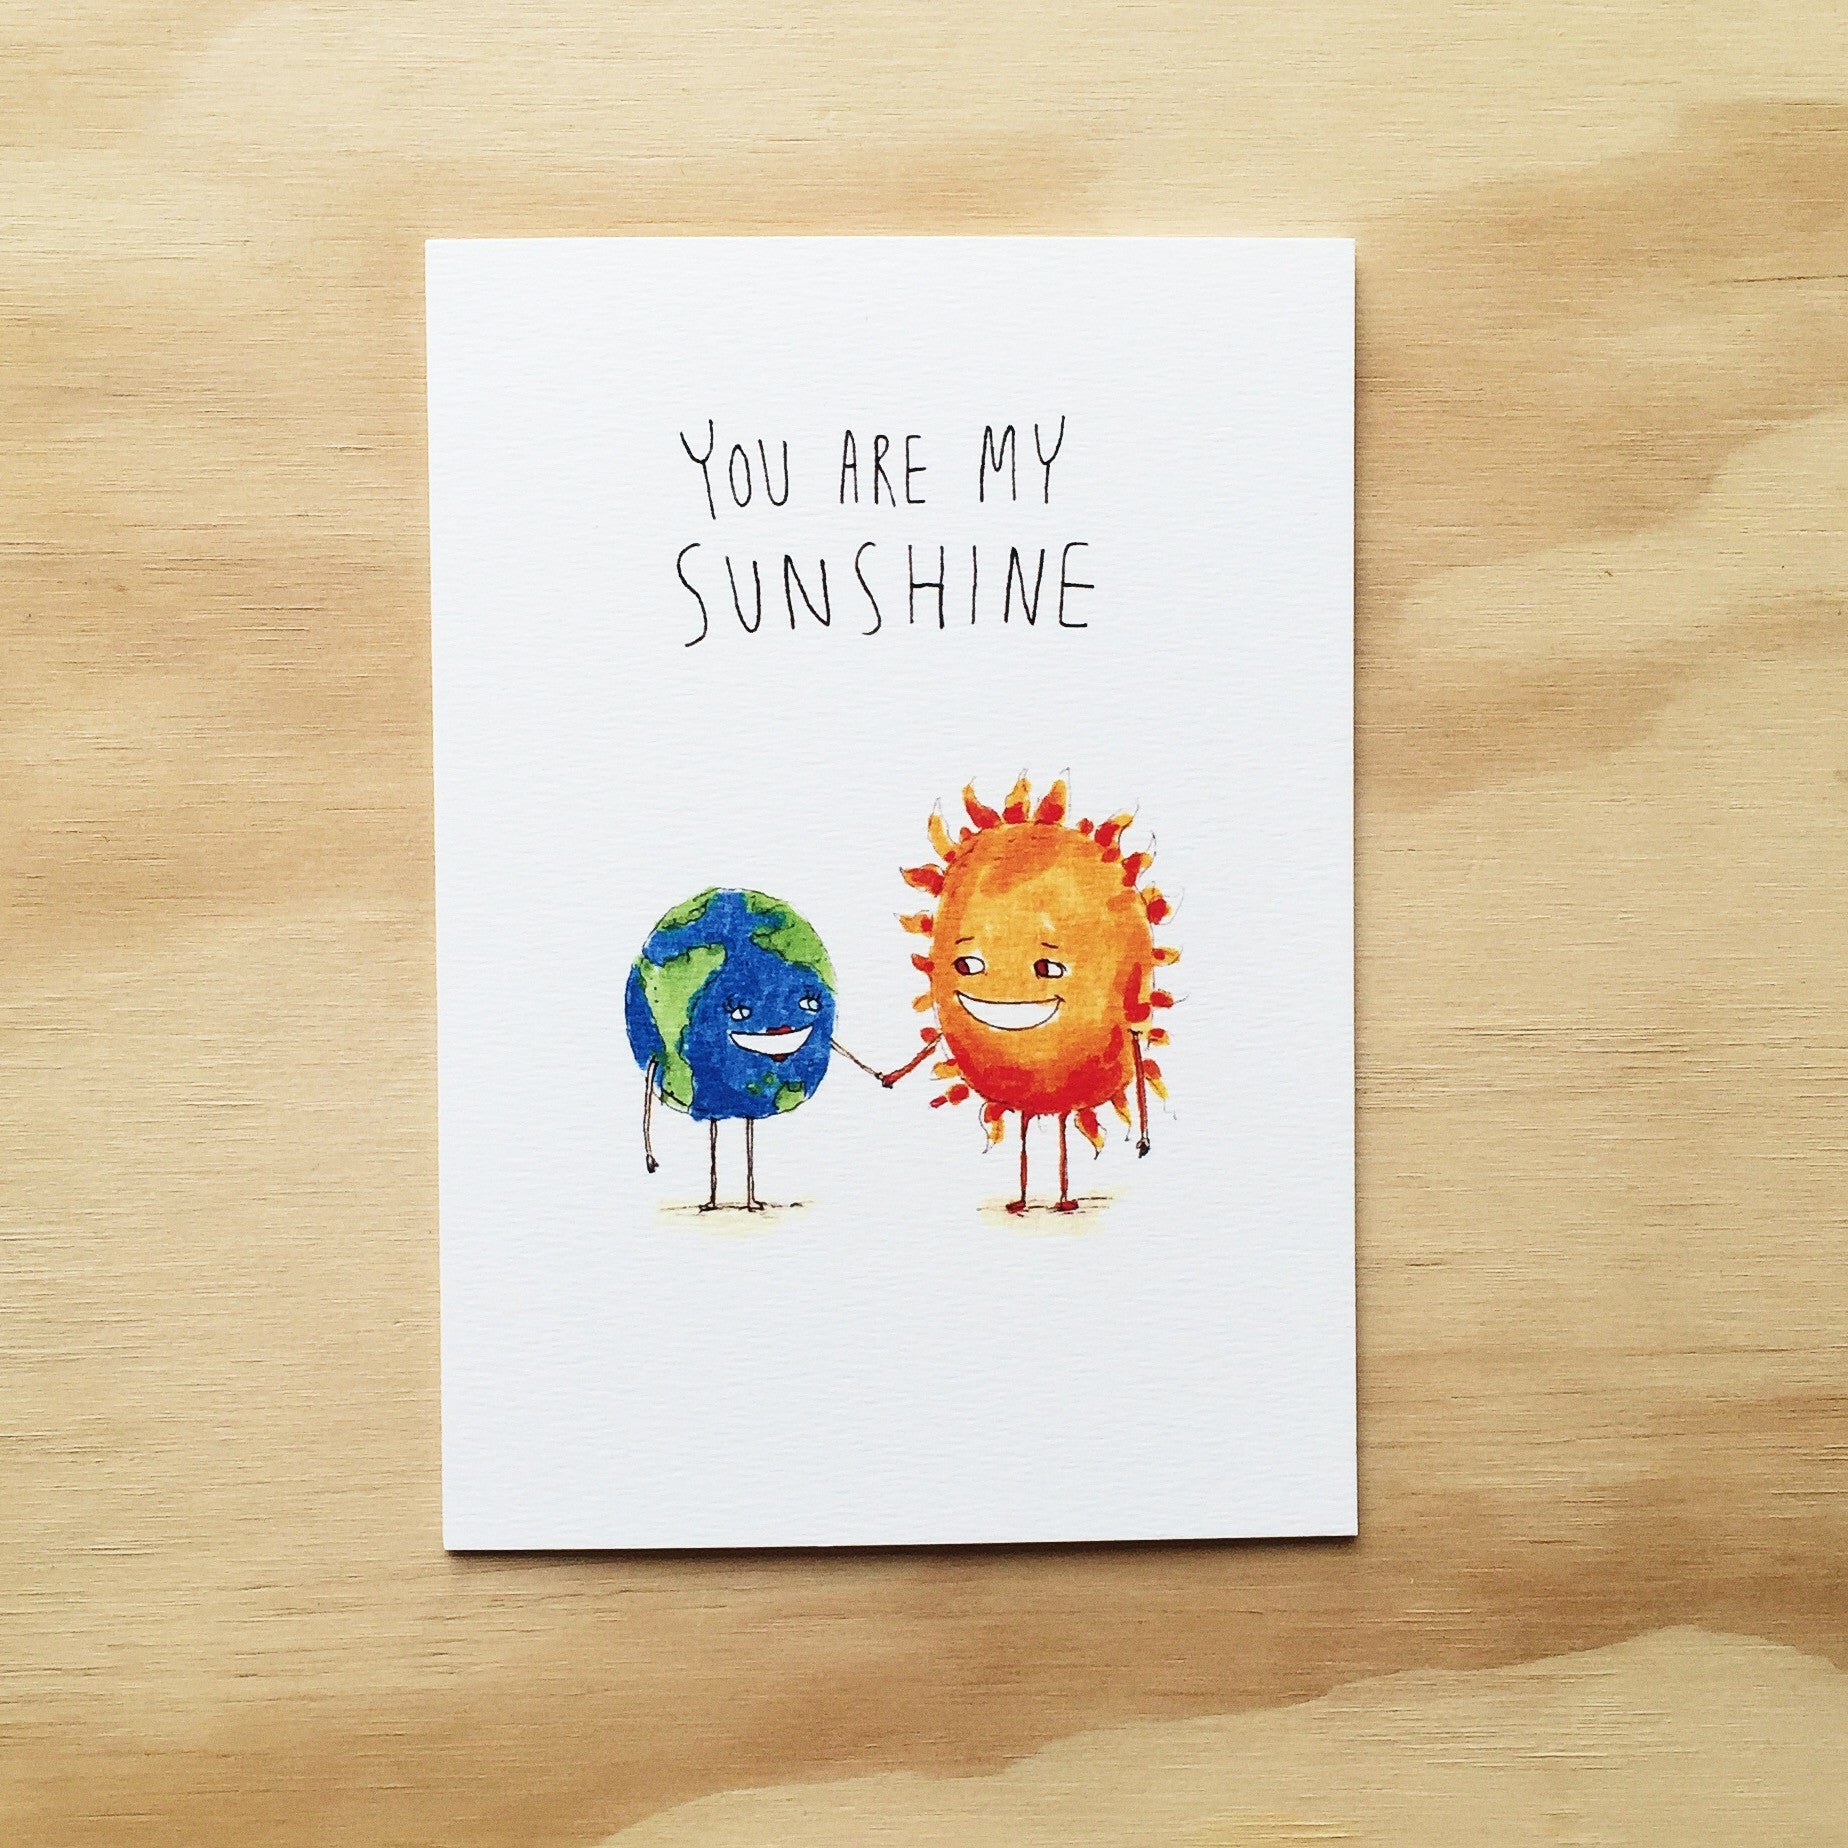 You Are My Sunshine - Well Drawn